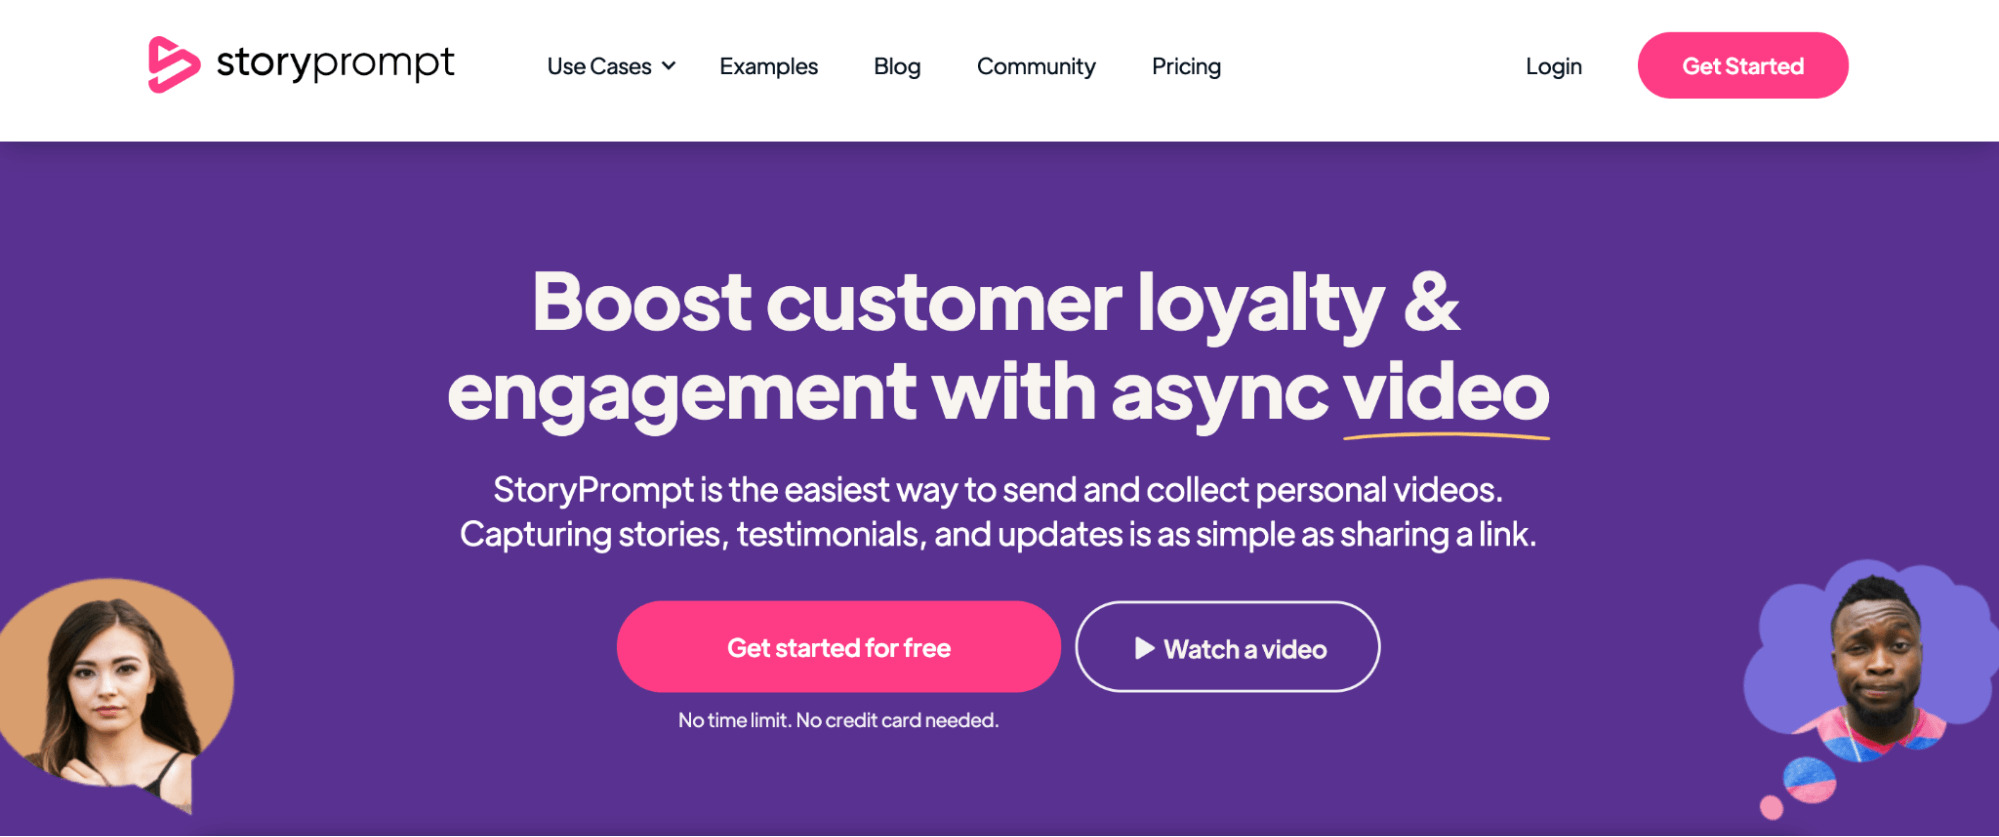 StoryPrompt homepage: Boost customer loyalty & engagement with async video